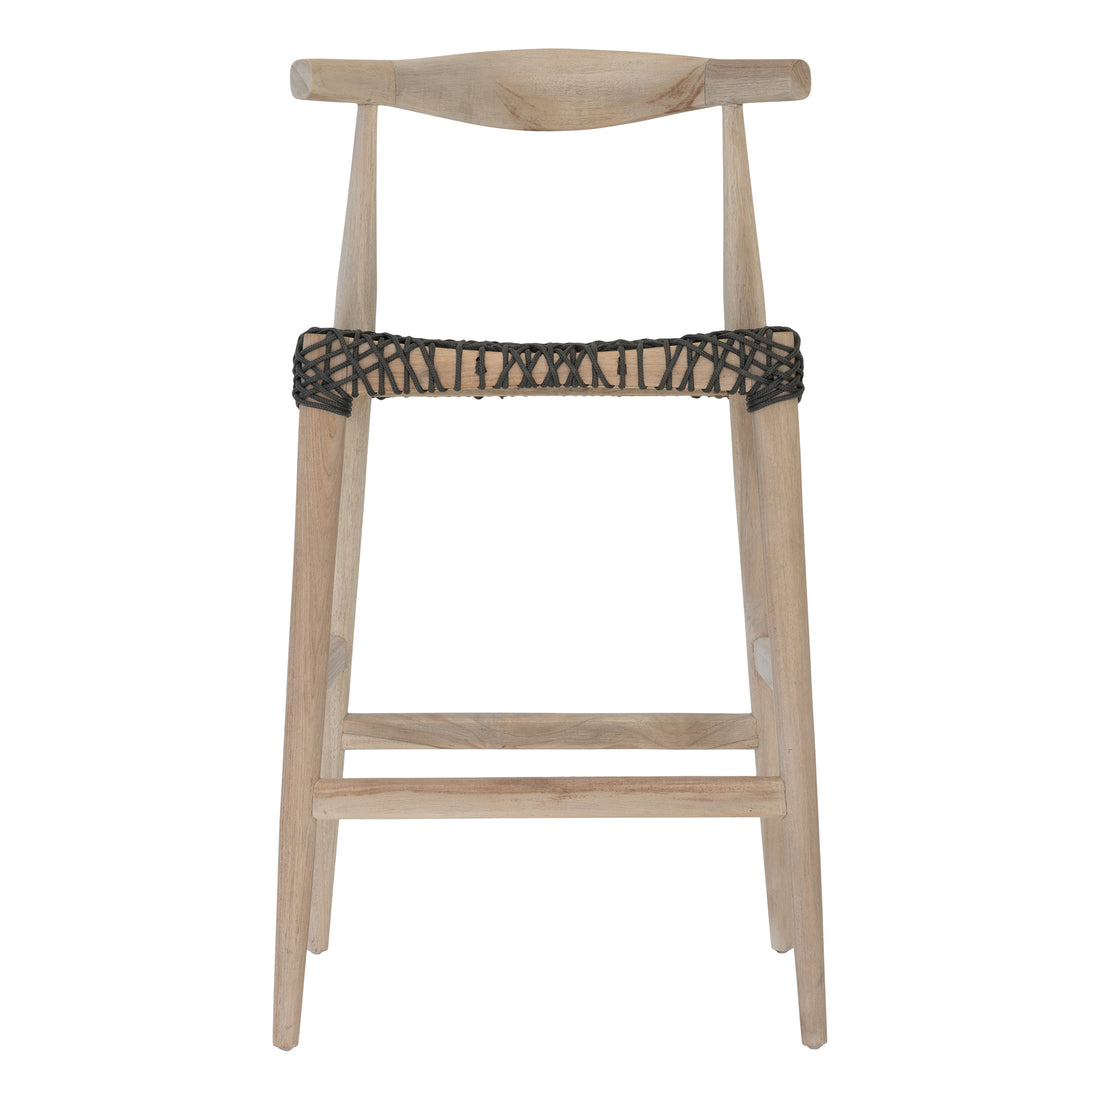 Sweni Horn Barchair | Charcoal | Rope